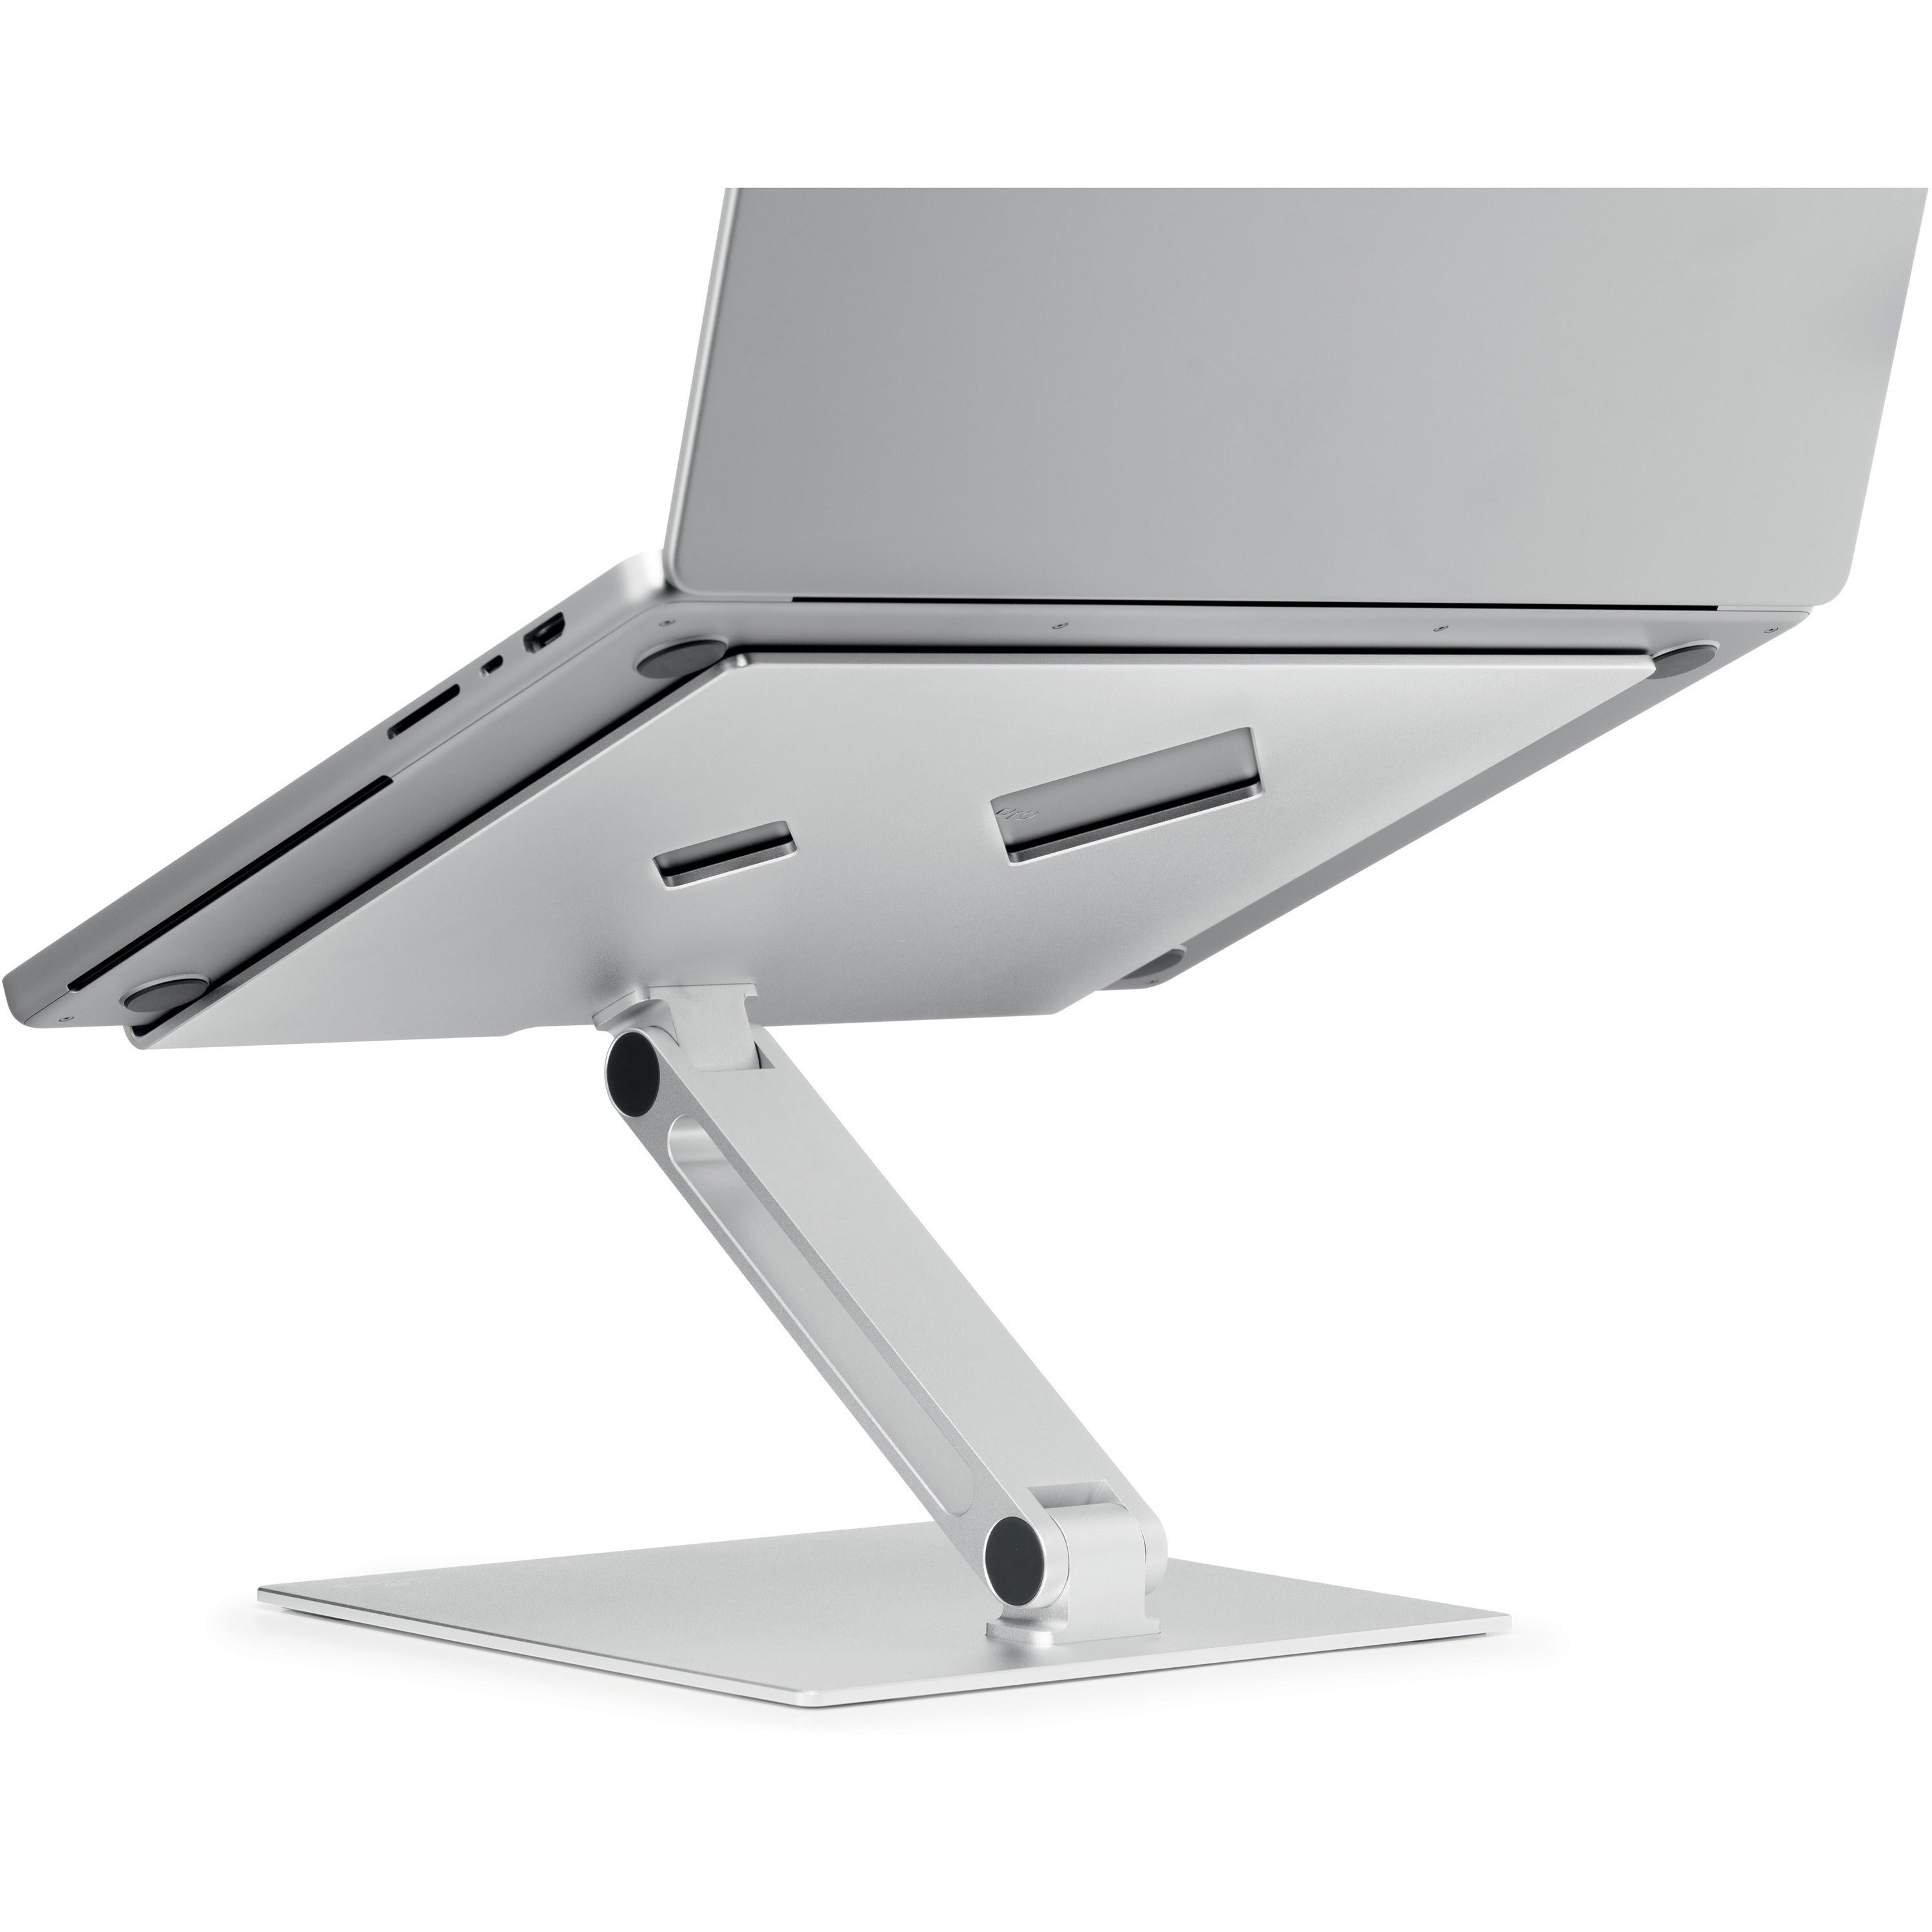 durable-rise-laptop-stand-up-to-17-screen-support-126-height-x-91-width-x-11-depth-desktop-tabletop-aluminum-silver_dbl505023 - 4